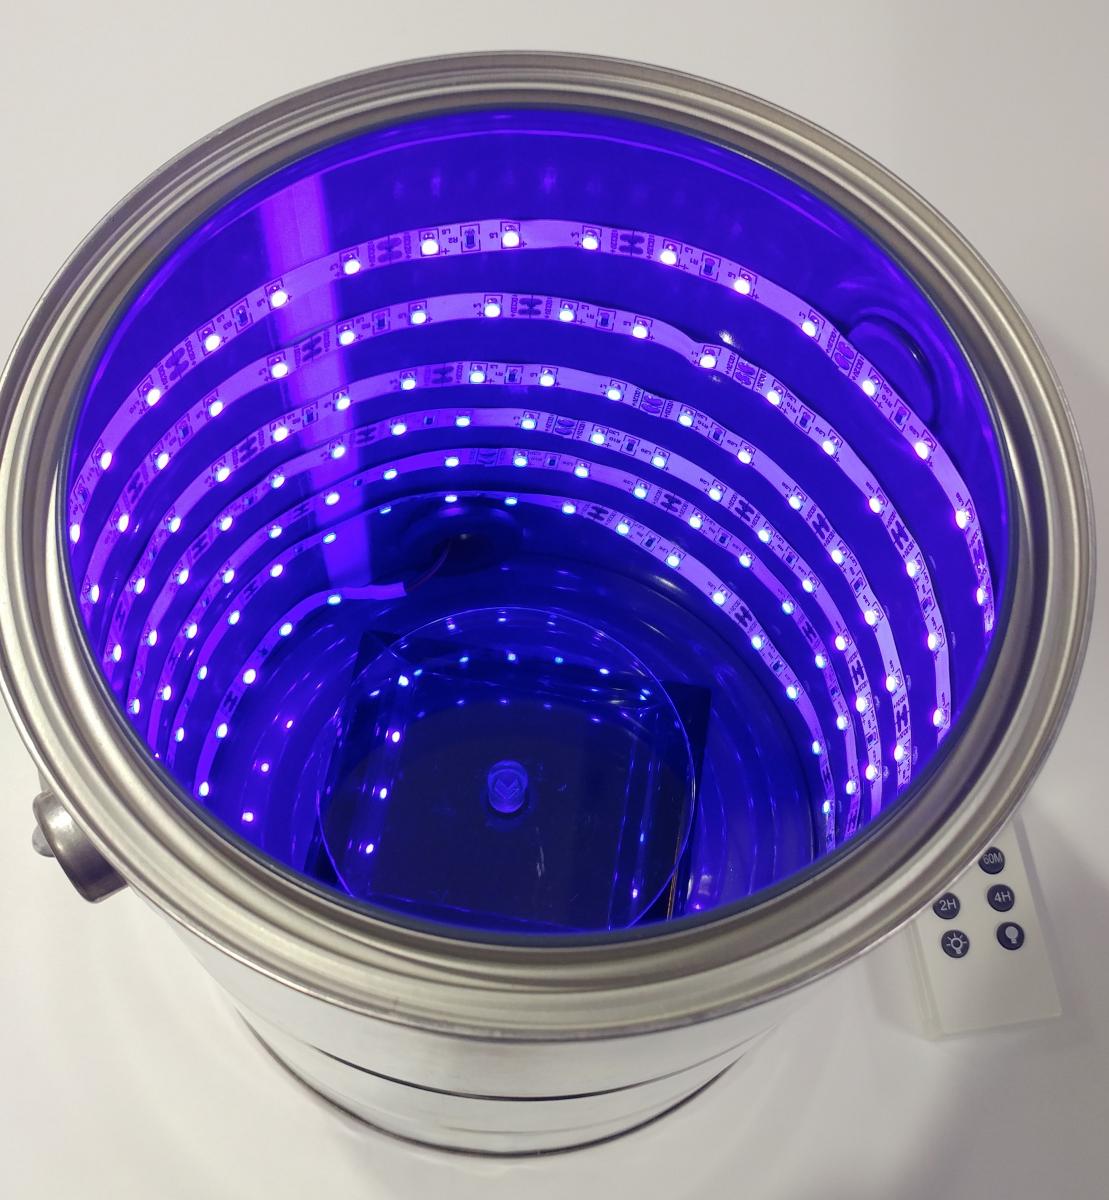 Do Space Making A UV Curing Chamber For Resin 3D Printed Parts - Do Space